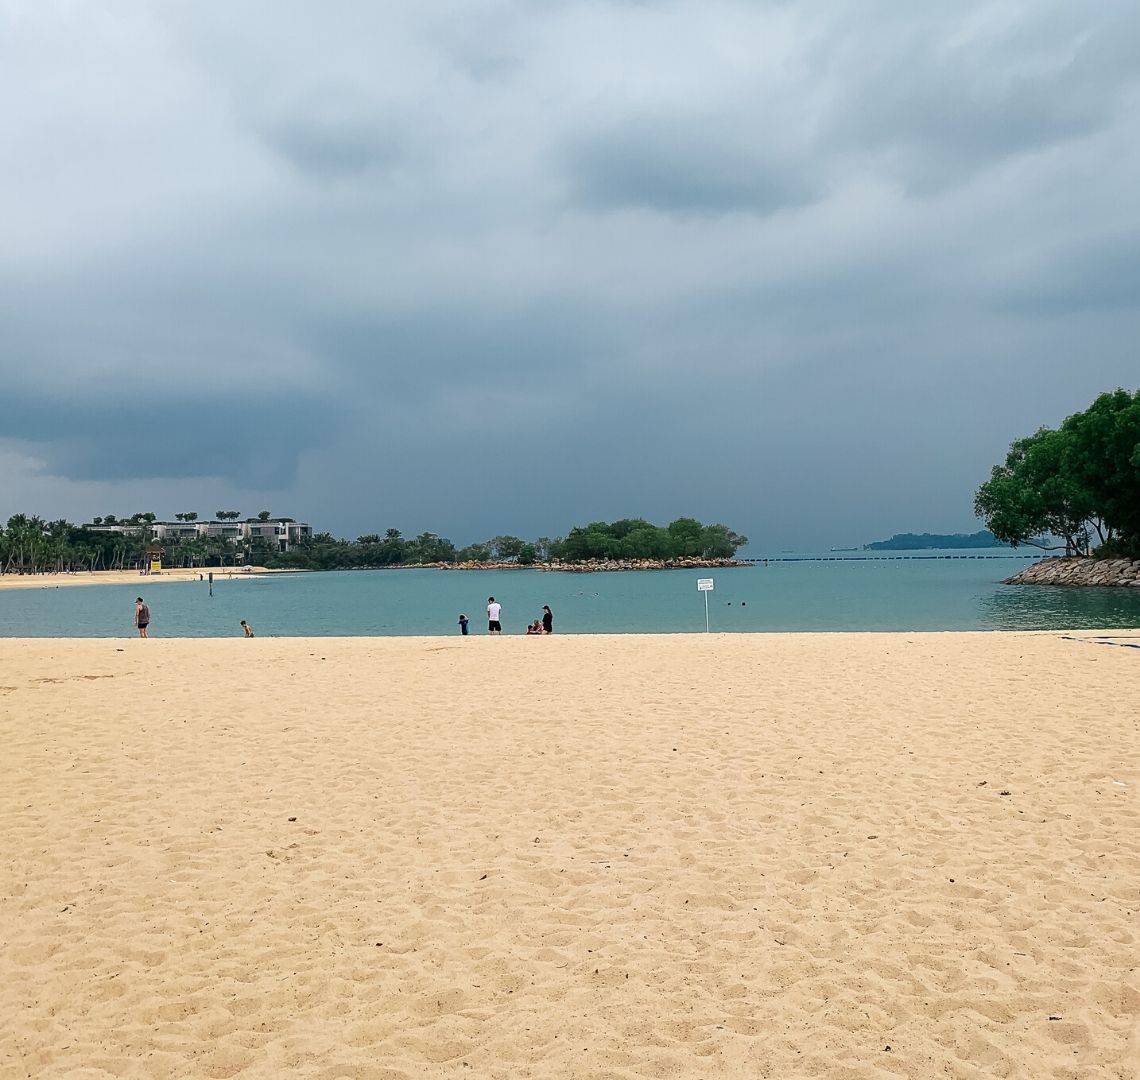 Things To Do In Sentosa With Kids - there is a long expanse of sand leading to a dark turquoise sea. There are a few people on the beach and a white sign is in the middle of the picture. To the right are some trees on a breakwater and to the left the beach bends out of sight and then curves round again where you can see some more trees and a building and another breakwater with trees on it. There is a grey island in the distance and the sky is stormy.